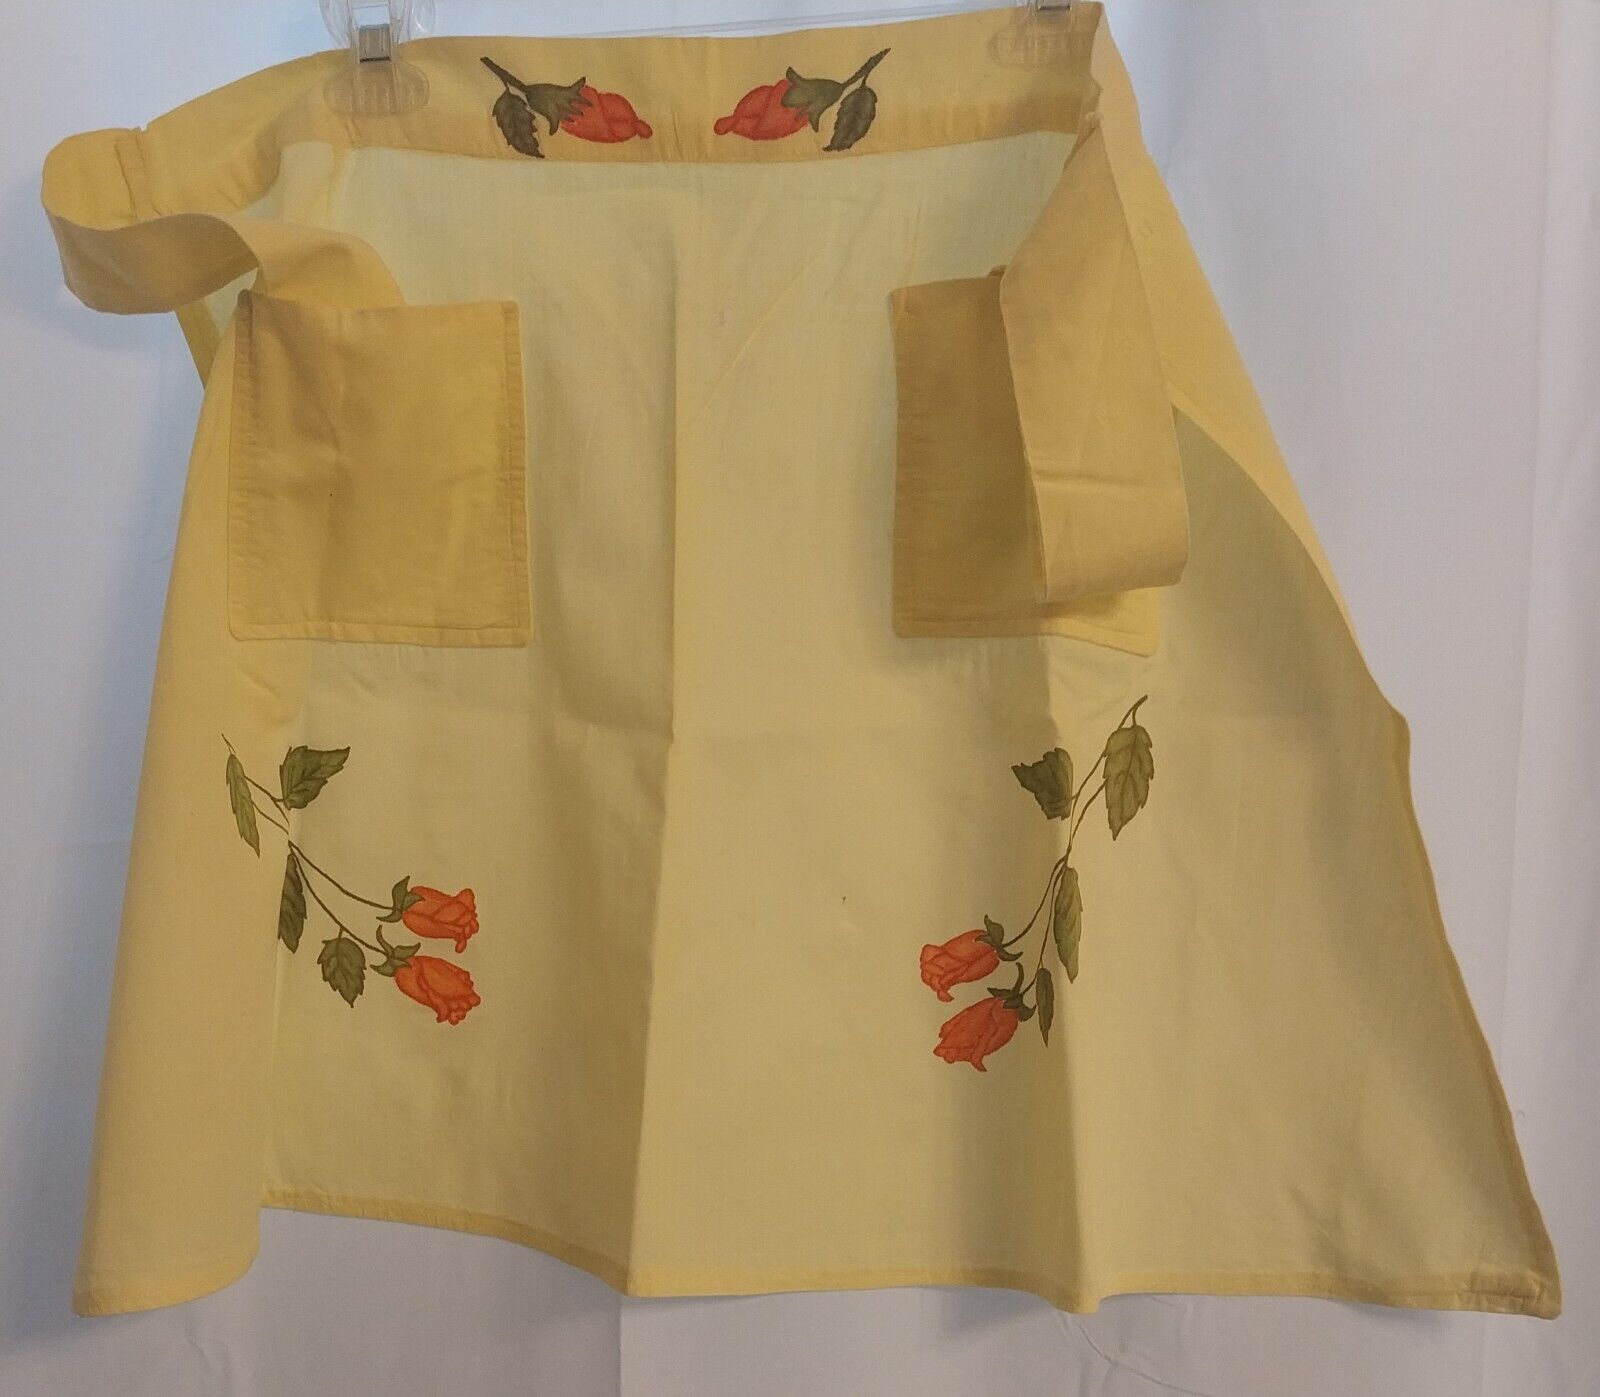 Handcrafted Vintage Yellow 1/2 Apron w/ Roses. Appears Unused * 2 Front Pockets